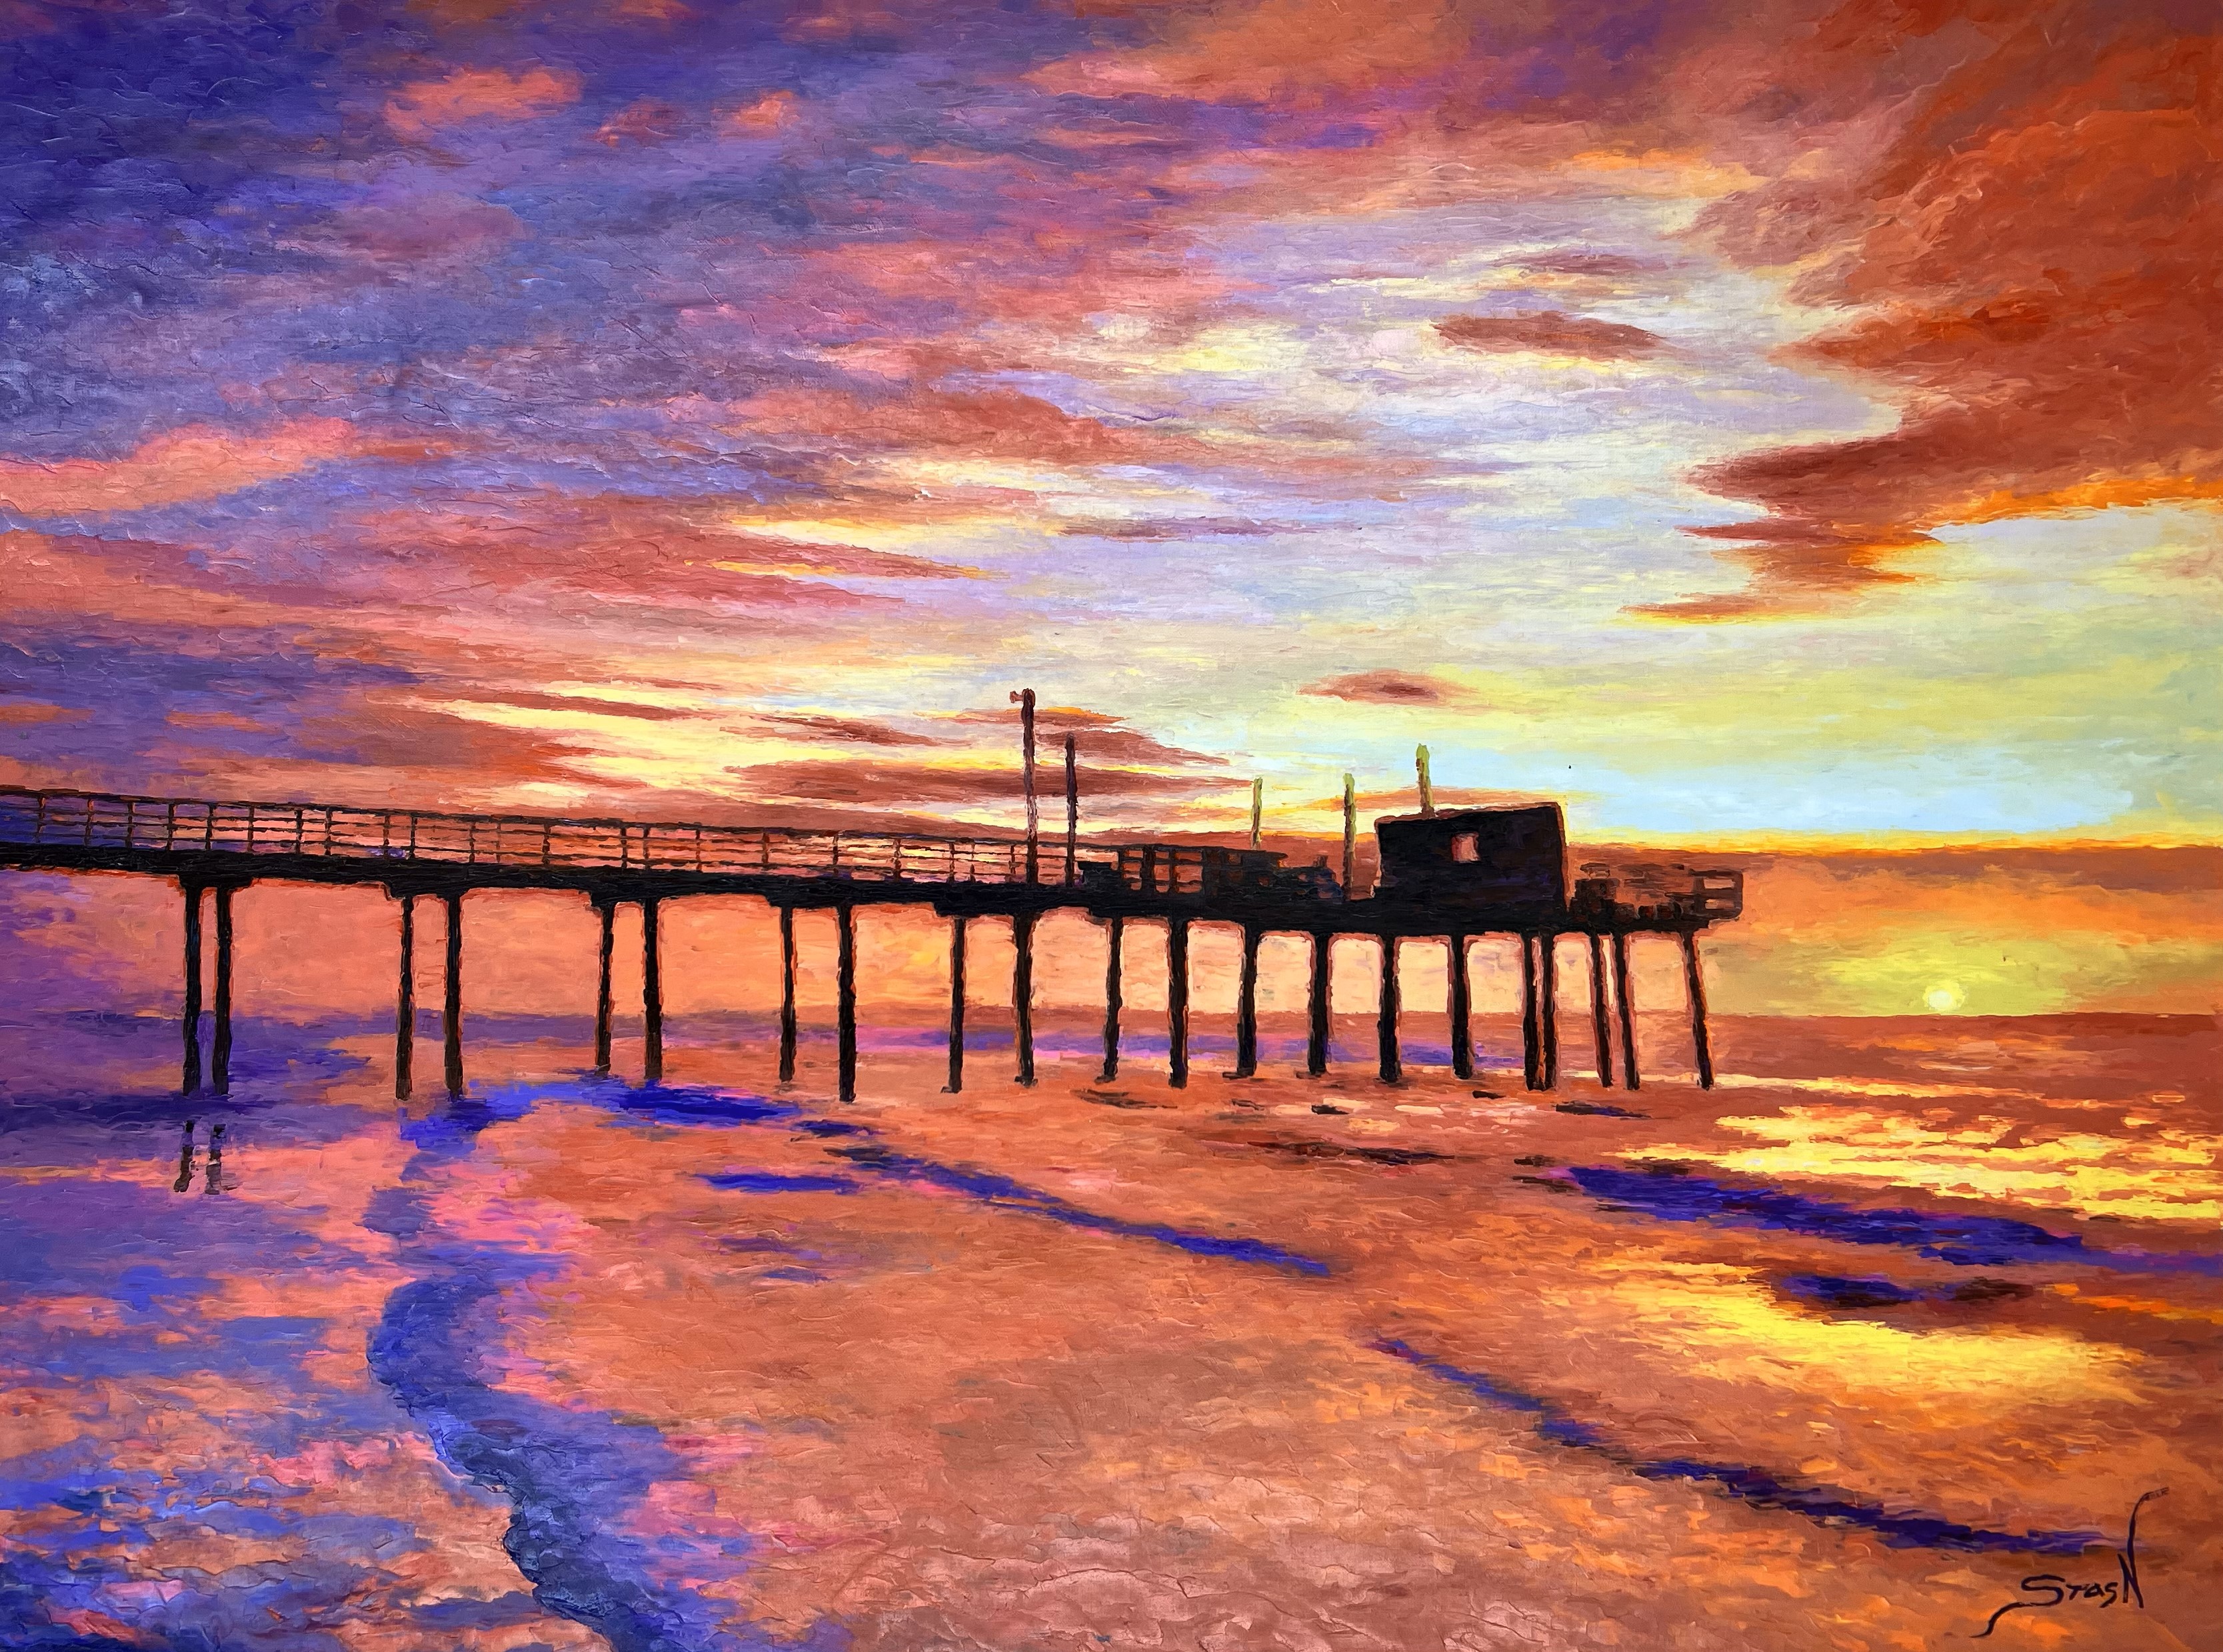 STAS NAMIN - Fishing Pier - Oil on Canvas - 36x48 inches